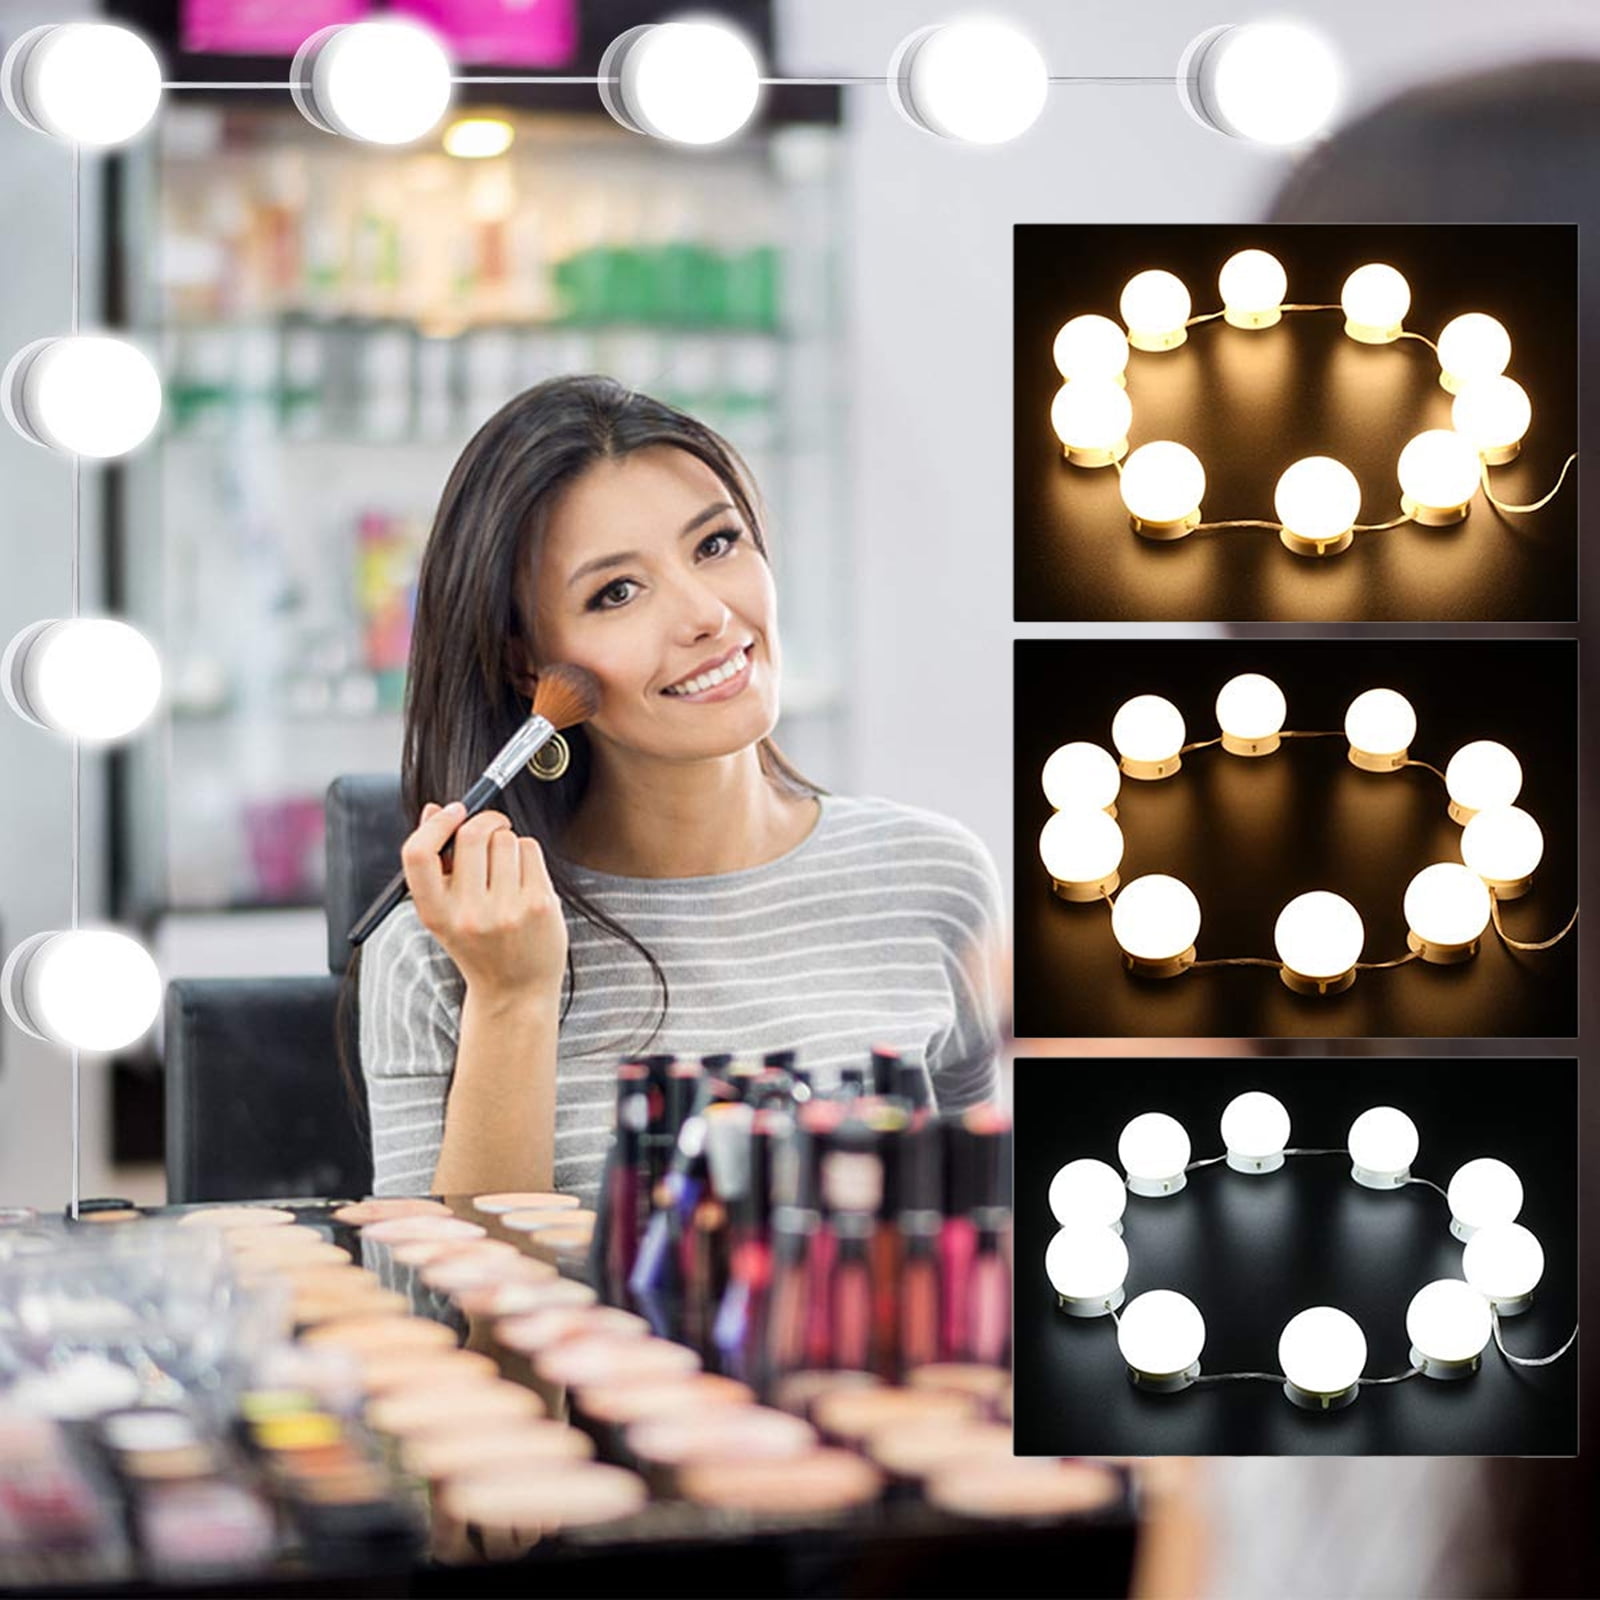 Auslese Makeup Mirror Dimmable usb LED Bulb Set of 10 Bulbs Lights for LED Vanity  Mirror with 3 Colour Modes & 10 Adjustable Brightness With Easy  Installation - Price in India, Buy